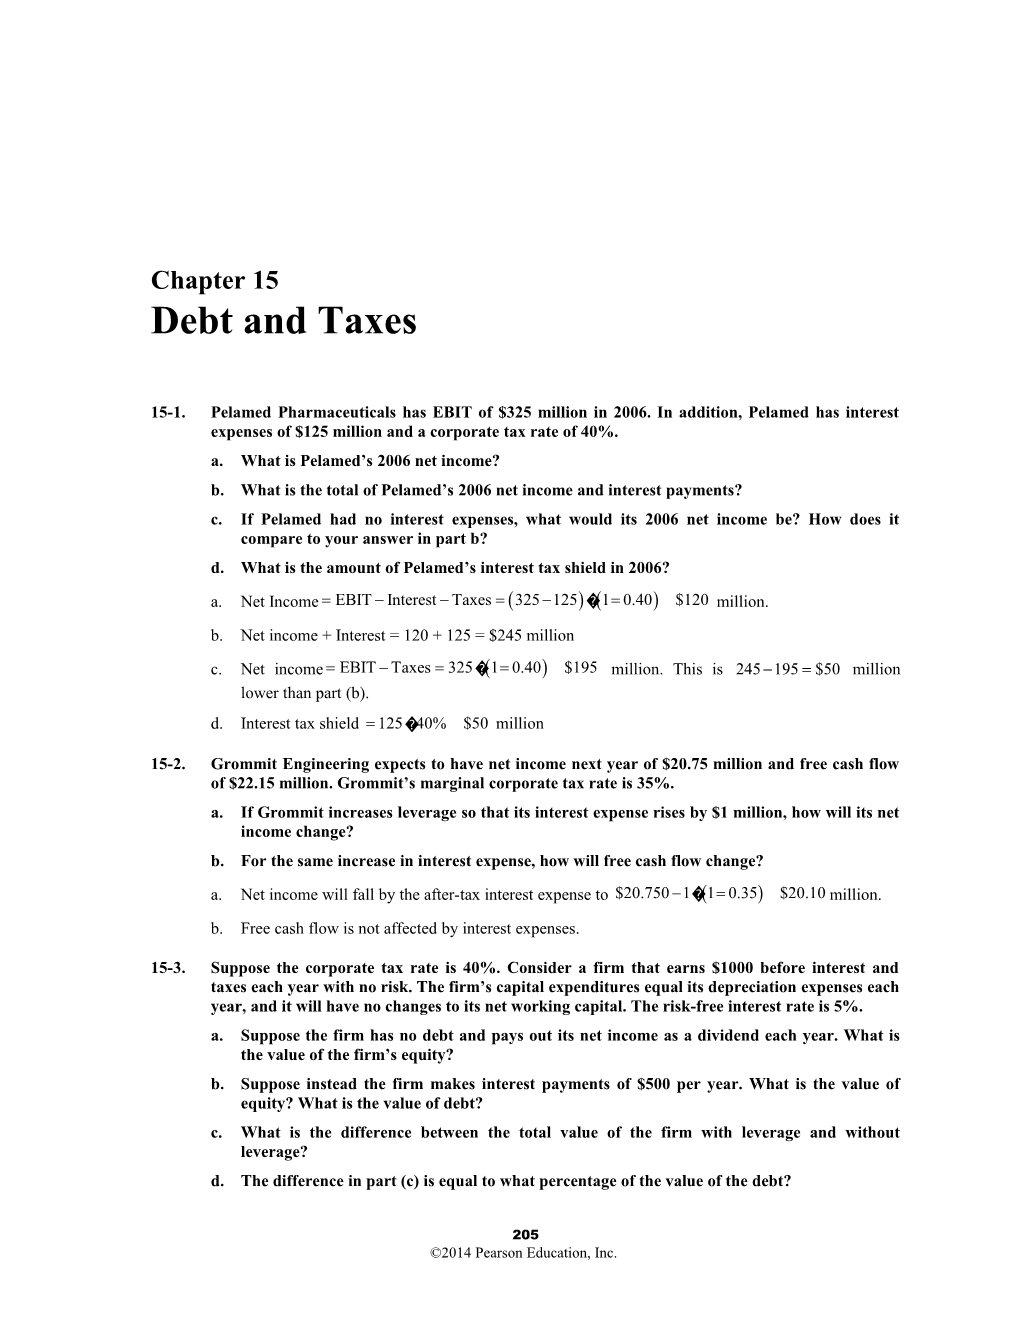 Chapter 15/Debt and Taxes 209